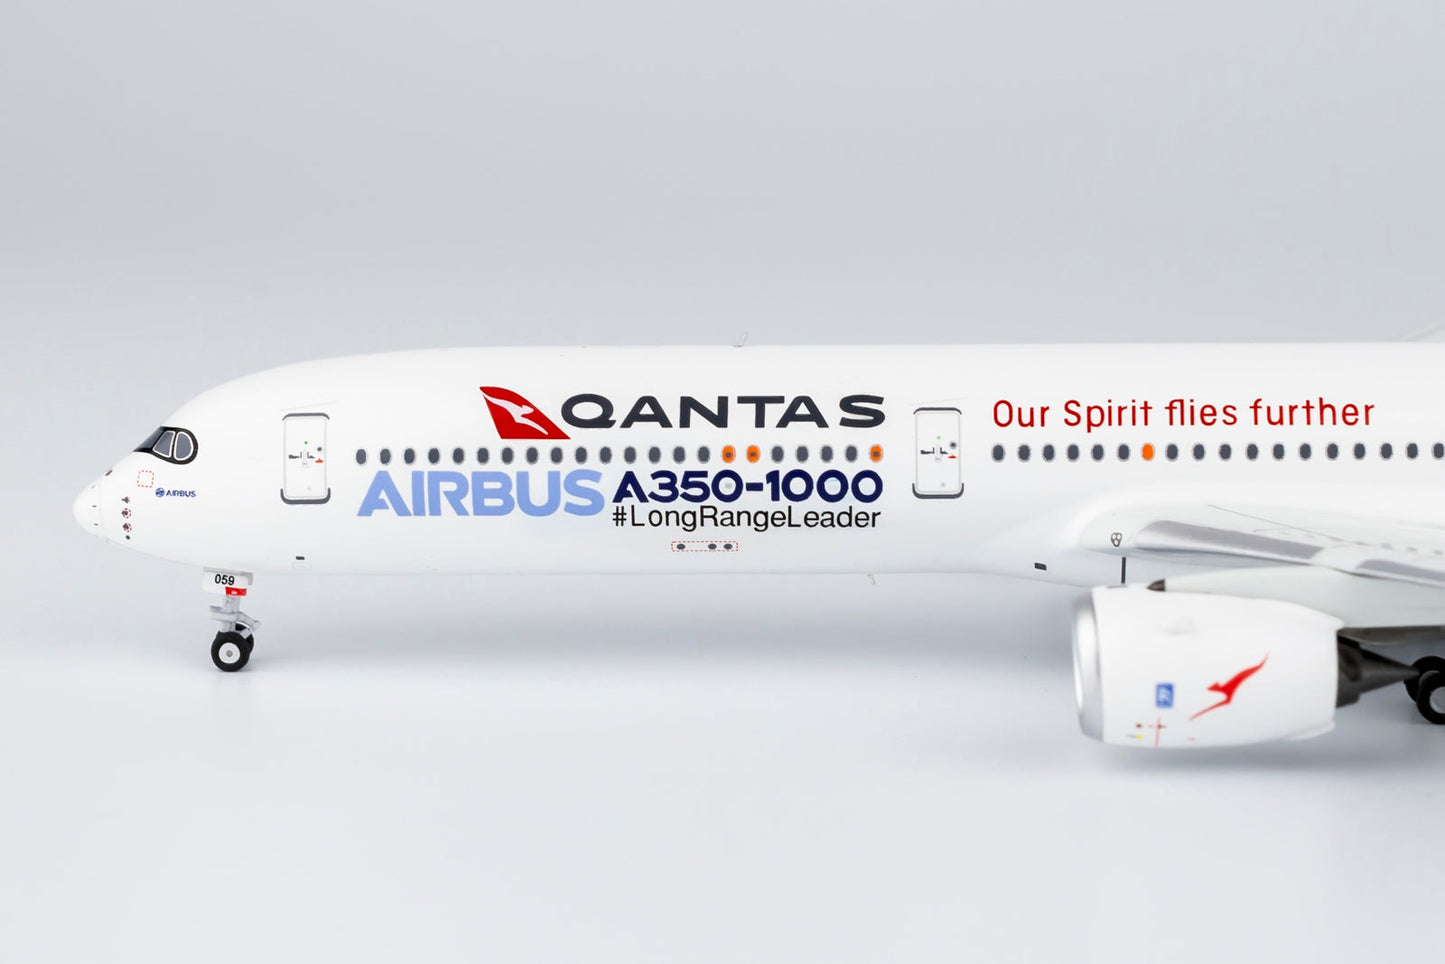 1/400 Airbus Industrie A350-1000 "Qantas Project Sunrise" NG Models 57001